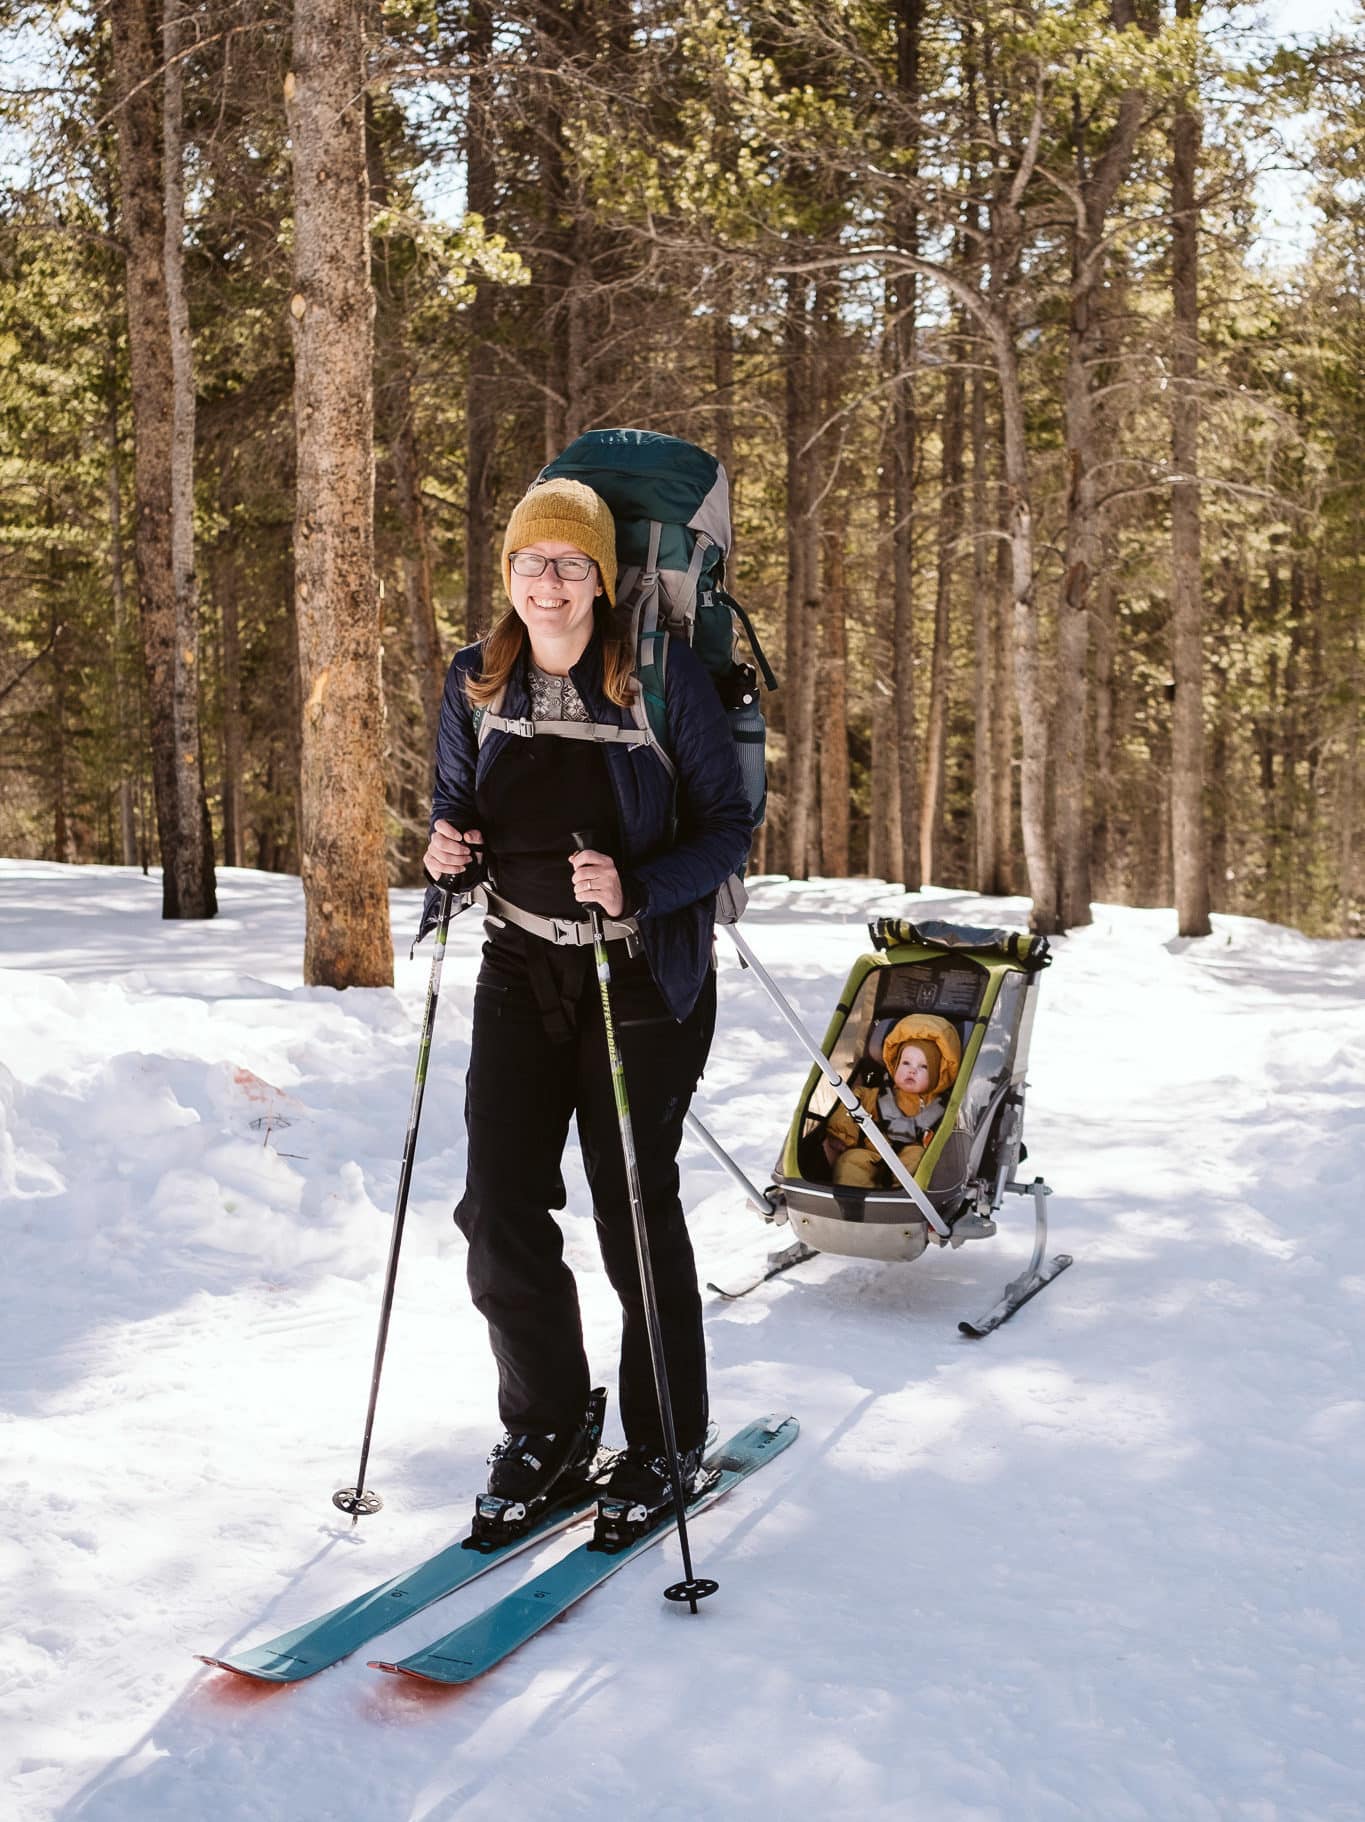 Nina backcountry skiing with her daughter